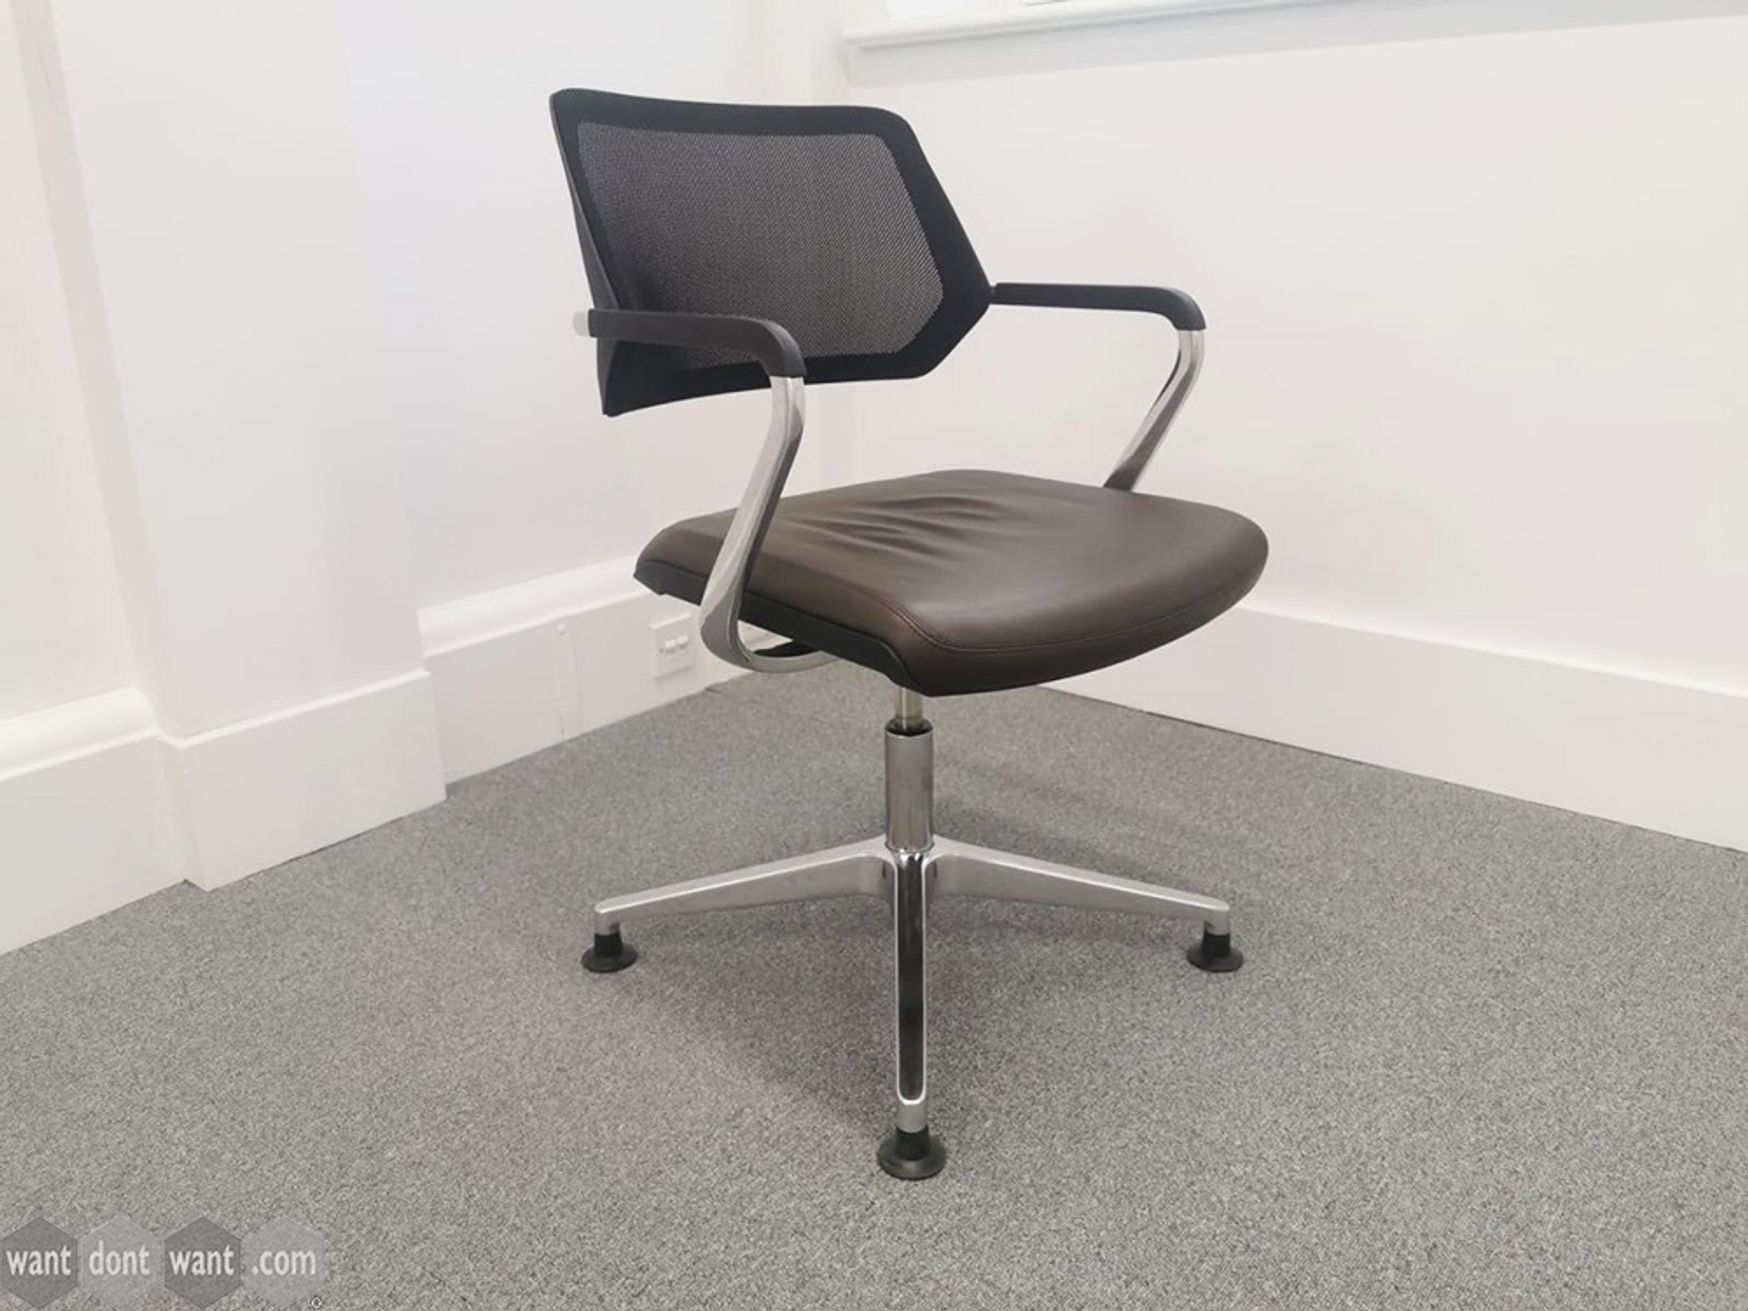 Used Steelcase 'Qivi' Boardroom Meeting Chairs on Glides